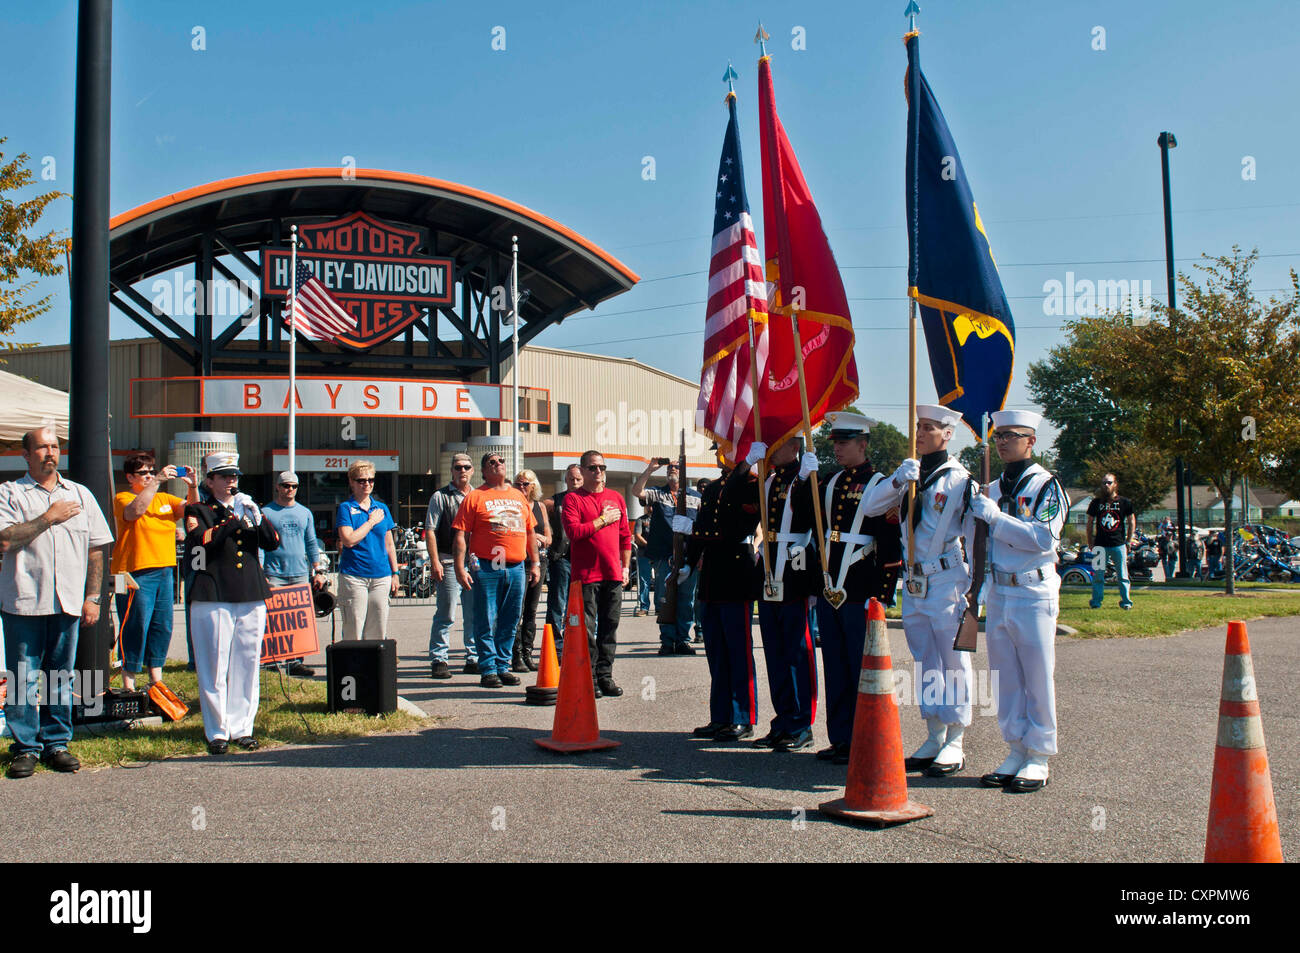 Sailors and Marines from Joint Expeditionary Base Little Creek-Fort Story, right, present colors while Marine Corps Gunnery Sgt. Angela Mink, left before the 12th Annual Fleet Ride at the Bayside Harley-Davidson in Portsmouth, Va. All proceeds from the event go to the Navy Marine Corps Relief Society. Stock Photo